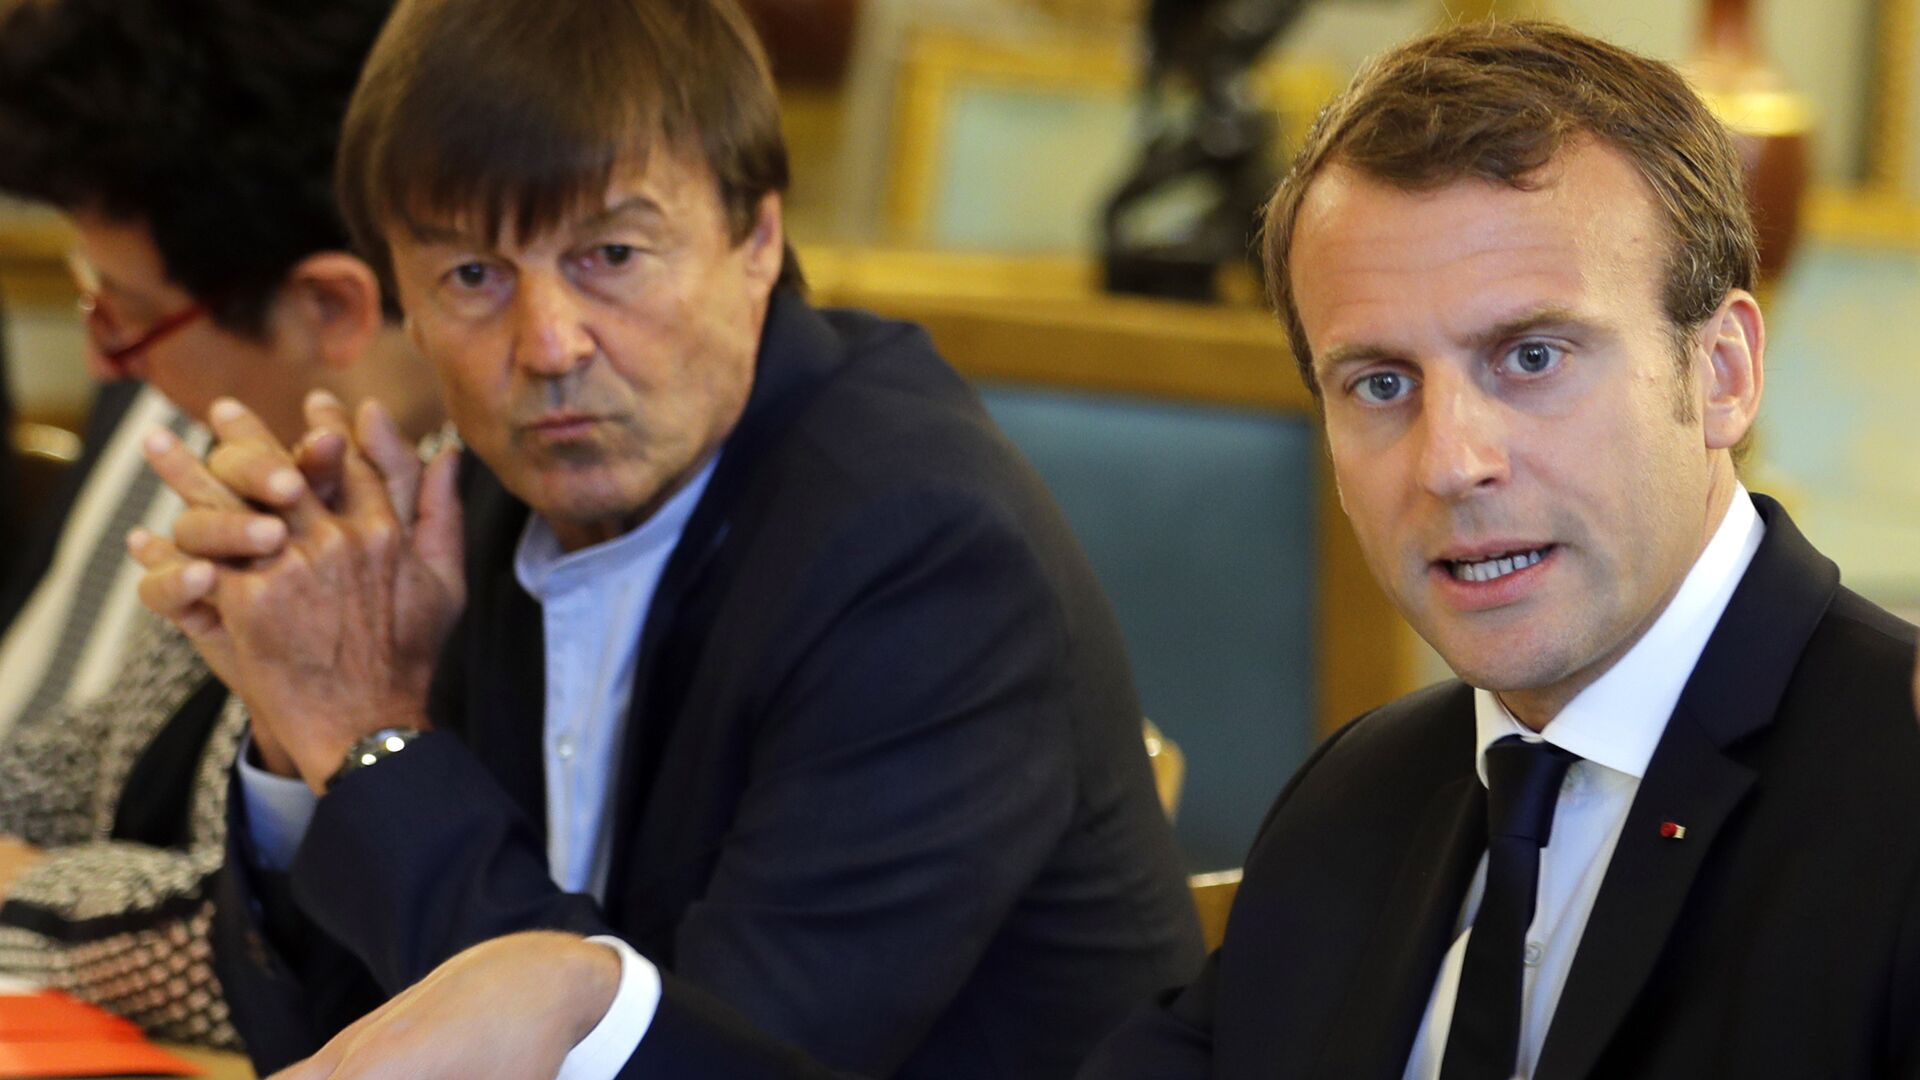 French President Emmanuel Macron, right, and Environment Minister Nicolas Hulot meet with NGOs to discuss climate and environment at the Elysee Palace in Paris,Tuesday, Sept. 5, 2017. - Sputnik Afrique, 1920, 26.11.2021